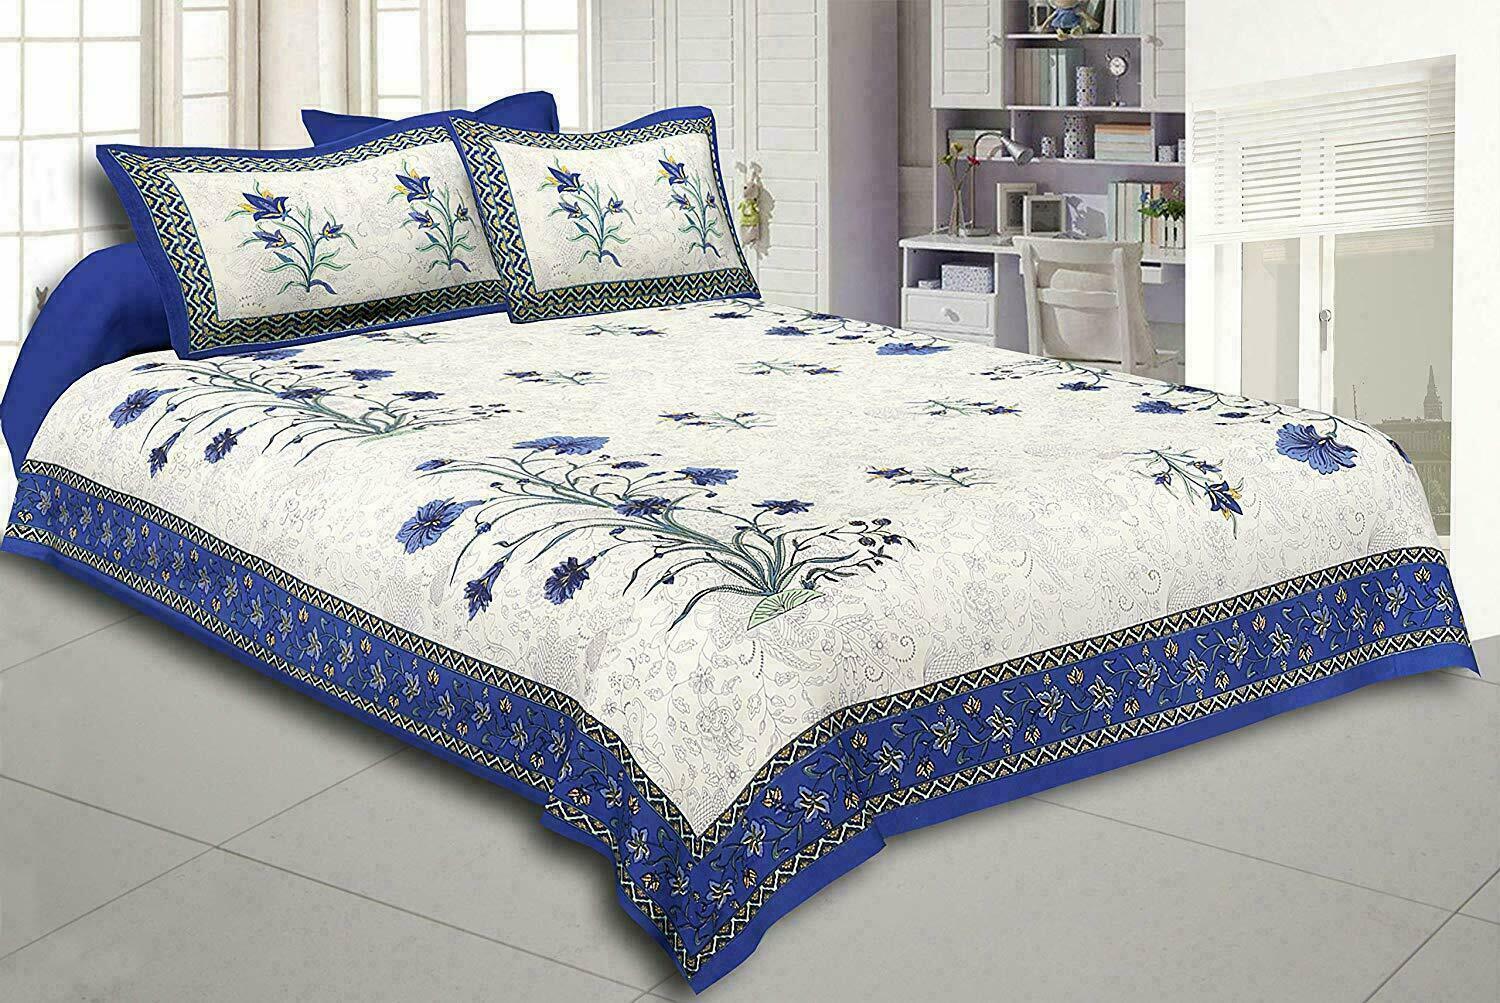 Floral Print Cotton Double Bedsheet with Two Pillow Covers Set 3